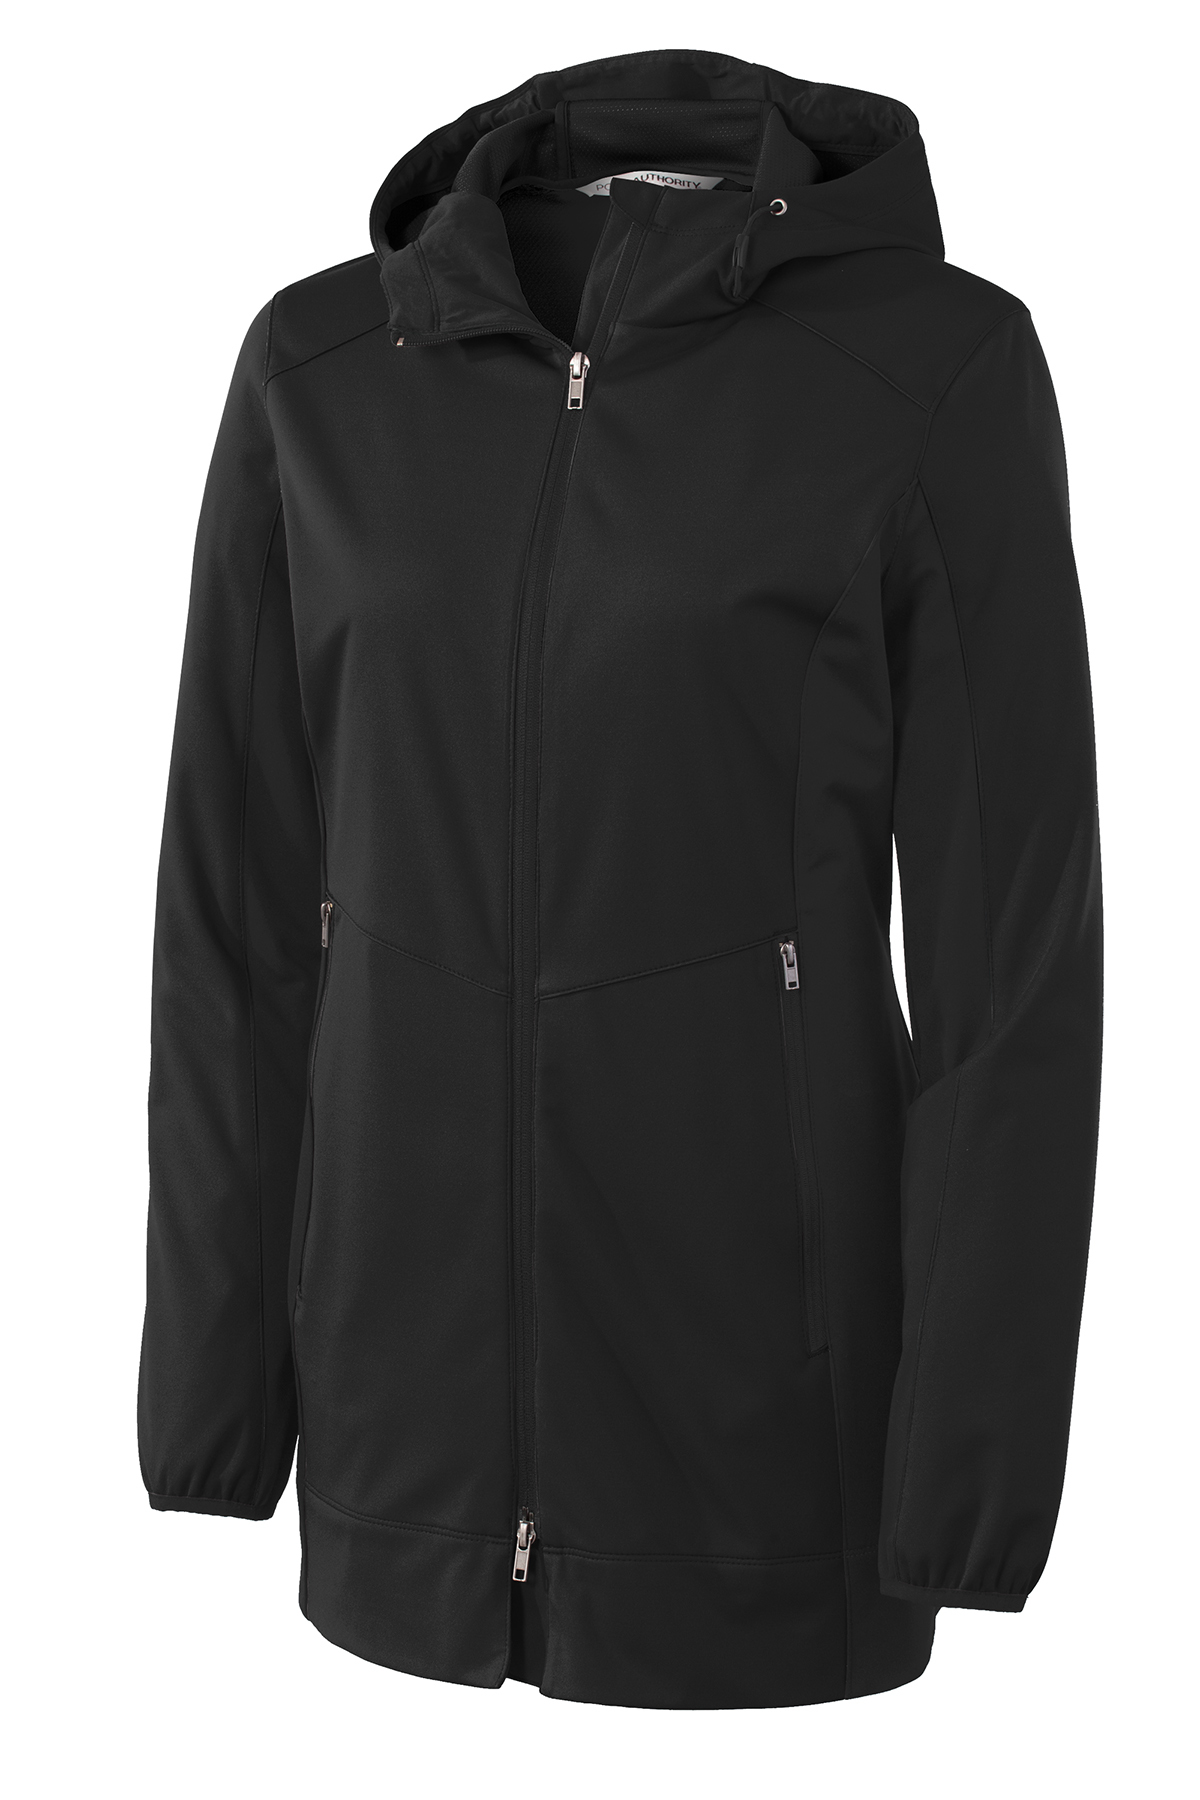 Port Authority Womens Ladies Active Hooded Soft Shell Jacket 